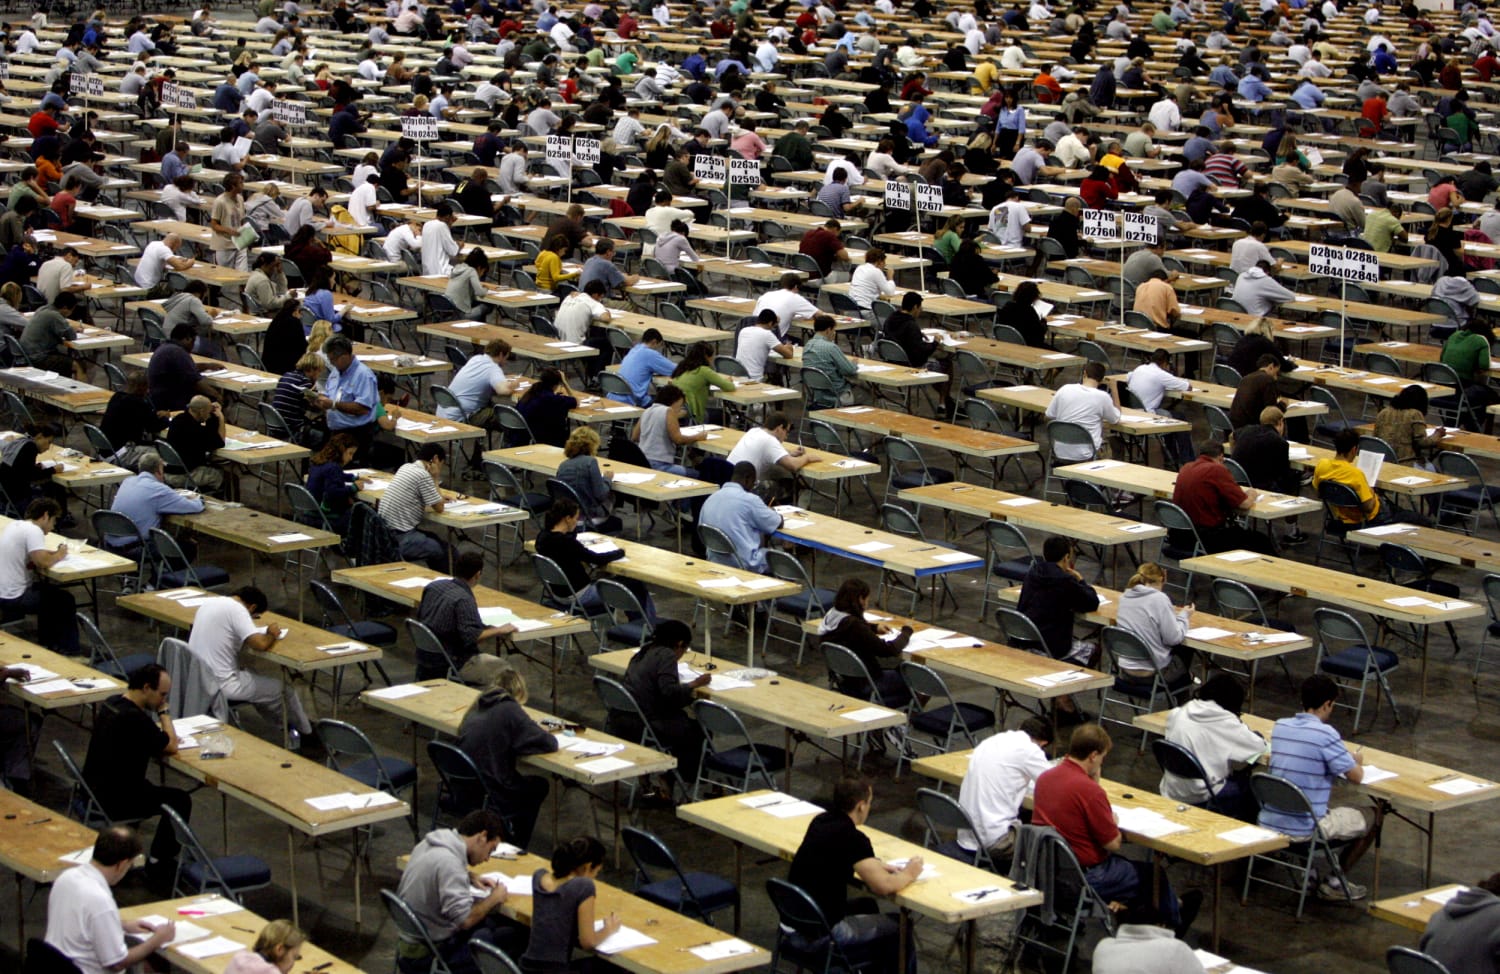 California State Bar accidentally leaks details of upcoming exam